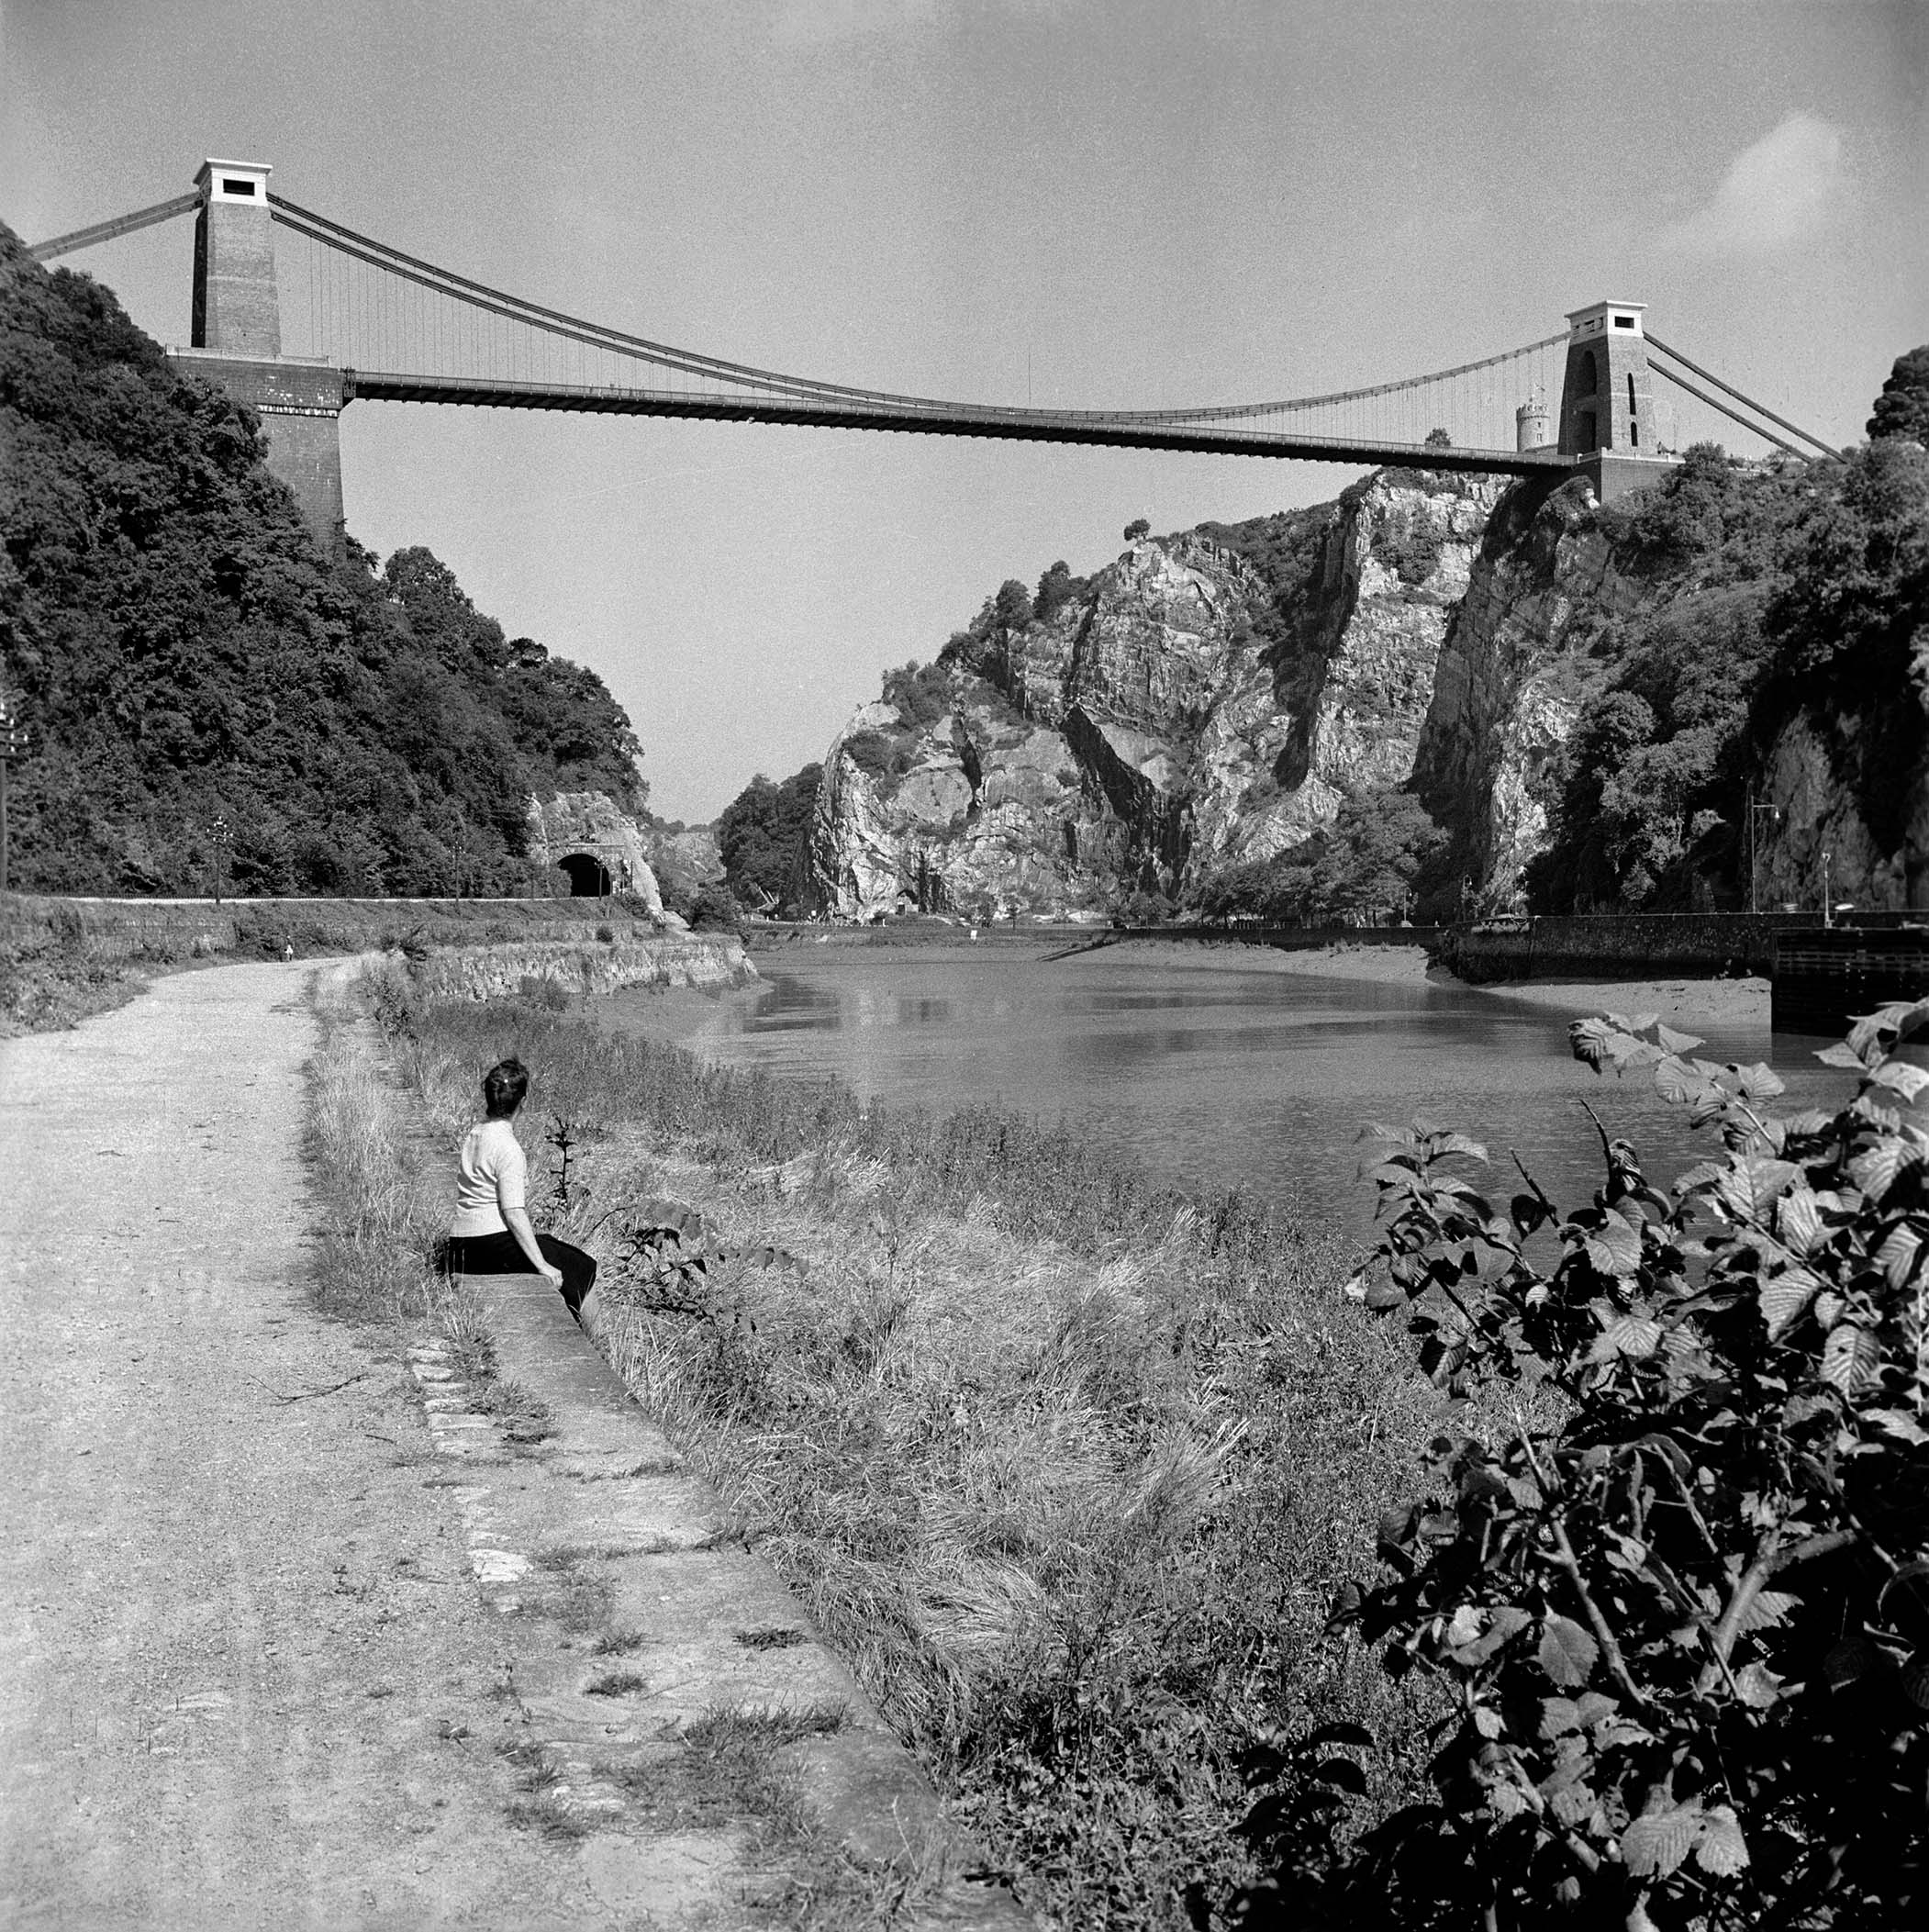 Image of Clifton Suspension Bridge in Bristol, where the world's first bungee jump happened